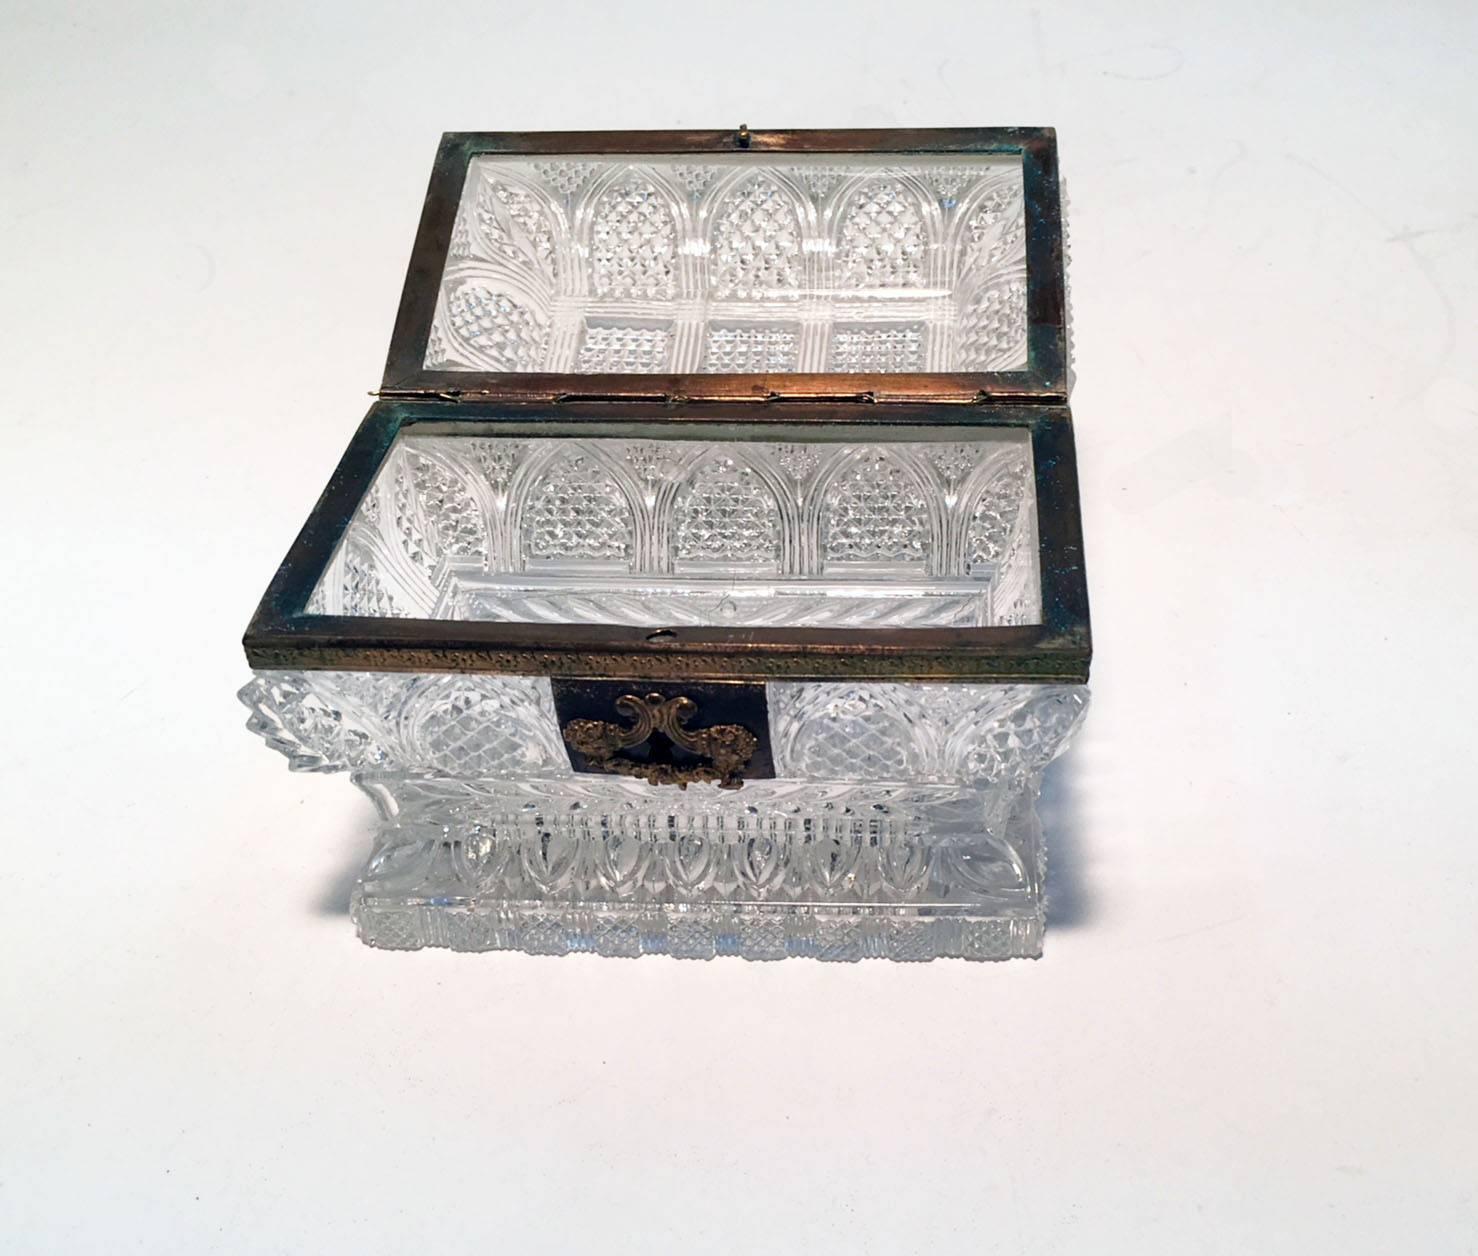 Unlike most similar boxes this one is of sarcophagus form, more costly to produce and more difficult to cut. This sort of quality is very frequently by Baccarat. The high light and clear metal of the glass would also support that view, as would the